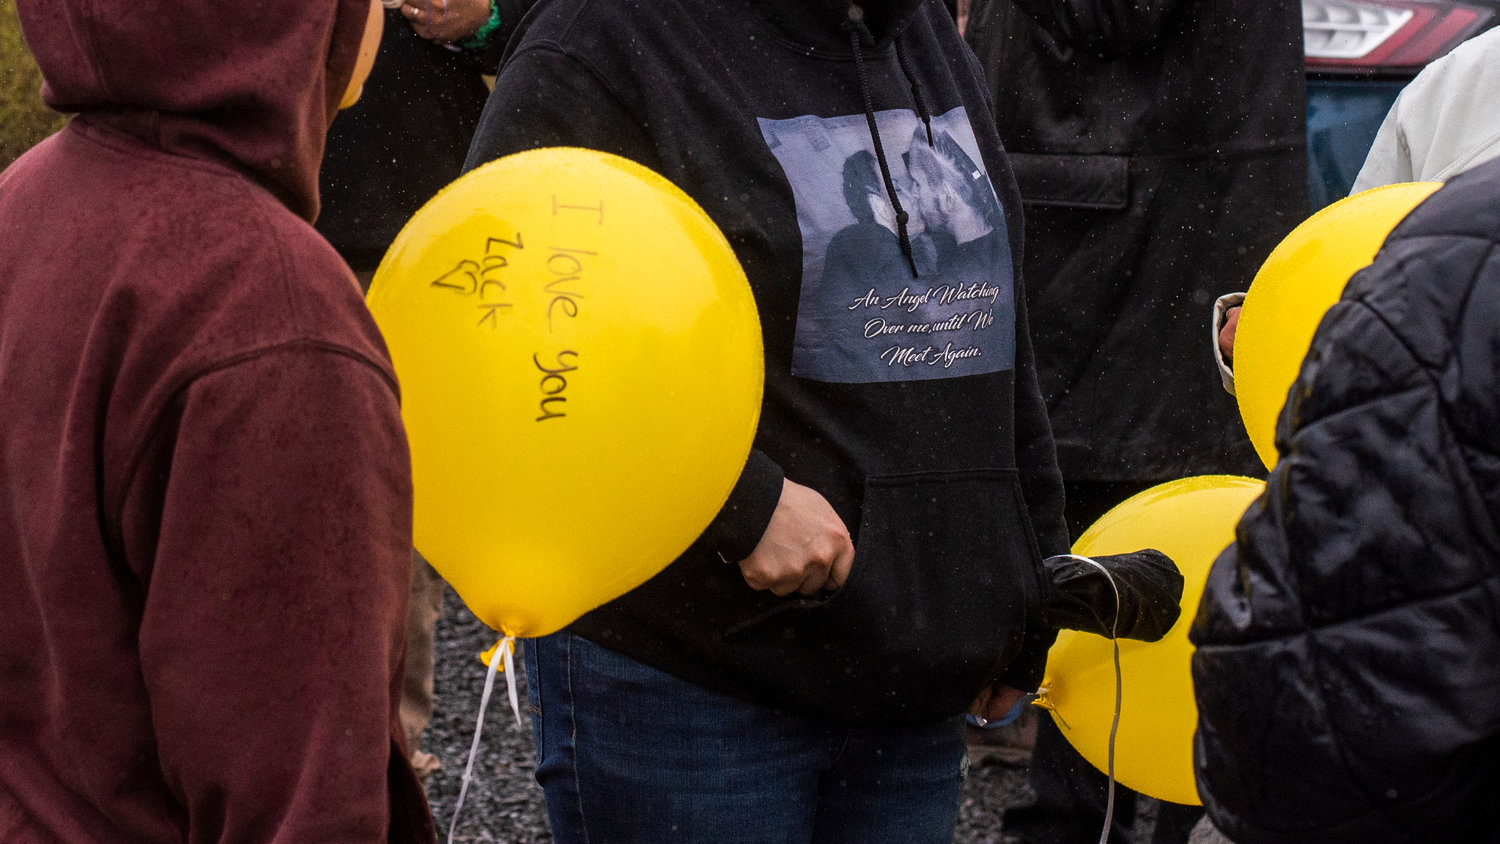 Messages are written on balloons before they are released during an event in remembrance of Zachary Rager Wednesday afternoon.